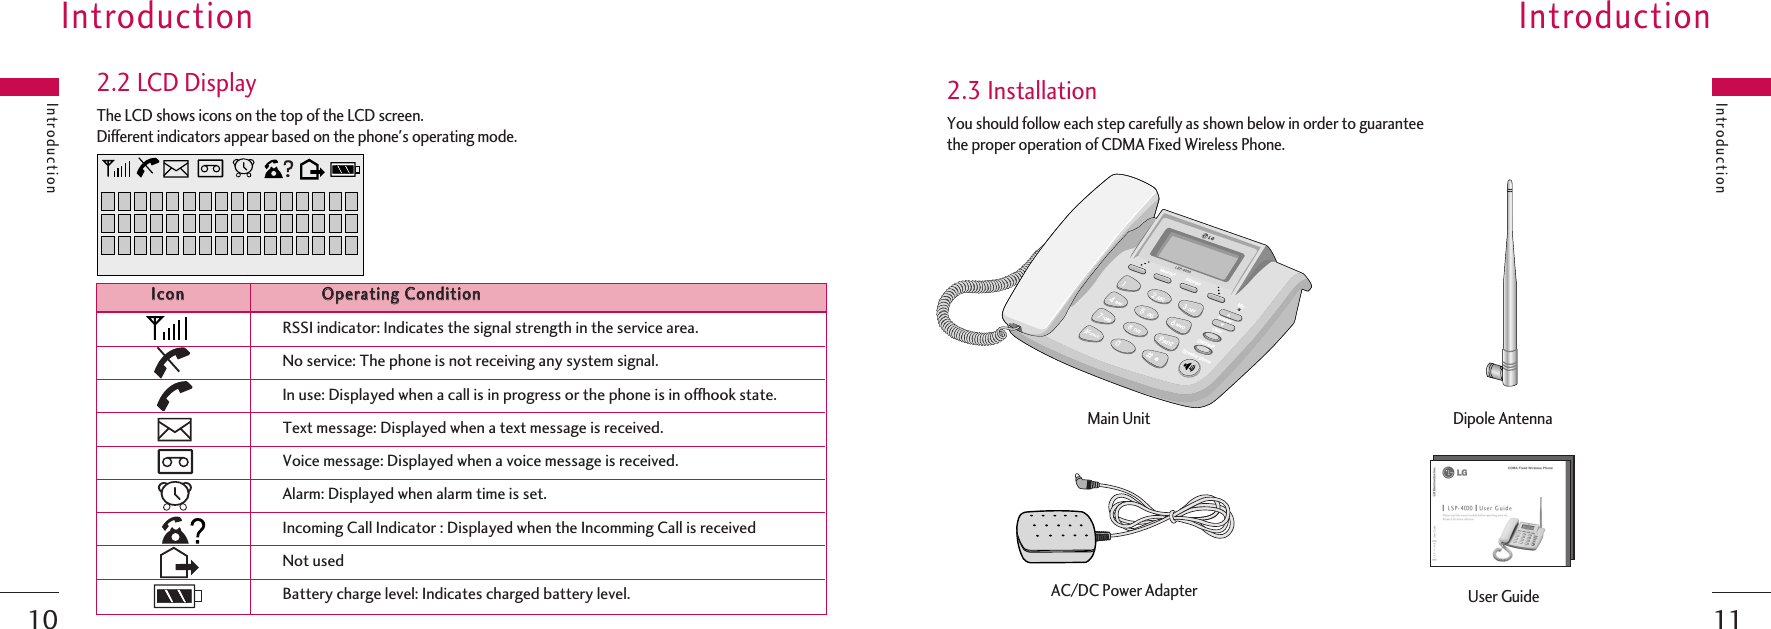 1110IntroductionYou should follow each step carefully as shown below in order to guaranteethe proper operation of CDMA Fixed Wireless Phone.2.3 InstallationMessageEND/PWRMicDial/FlashSpeaker phoneMessageEND/PWRMicVolumeClearDial/FlashSpeaker phoneAC/DC Power AdapterMain UnitUser GuideDipole AntennaIntroductionThe LCD shows icons on the top of the LCD screen.Different indicators appear based on the phone&apos;s operating mode.2.2 LCD DisplayIntroductionIIccoonnOOppeerraattiinngg  CCoonnddiittiioonnRSSI indicator: Indicates the signal strength in the service area.No service: The phone is not receiving any system signal.In use: Displayed when a call is in progress or the phone is in offhook state.Text message: Displayed when a text message is received.Voice message: Displayed when a voice message is received.Alarm: Displayed when alarm time is set.Incoming Call Indicator : Displayed when the Incomming Call is receivedNot usedBattery charge level: Indicates charged battery level.Introduction